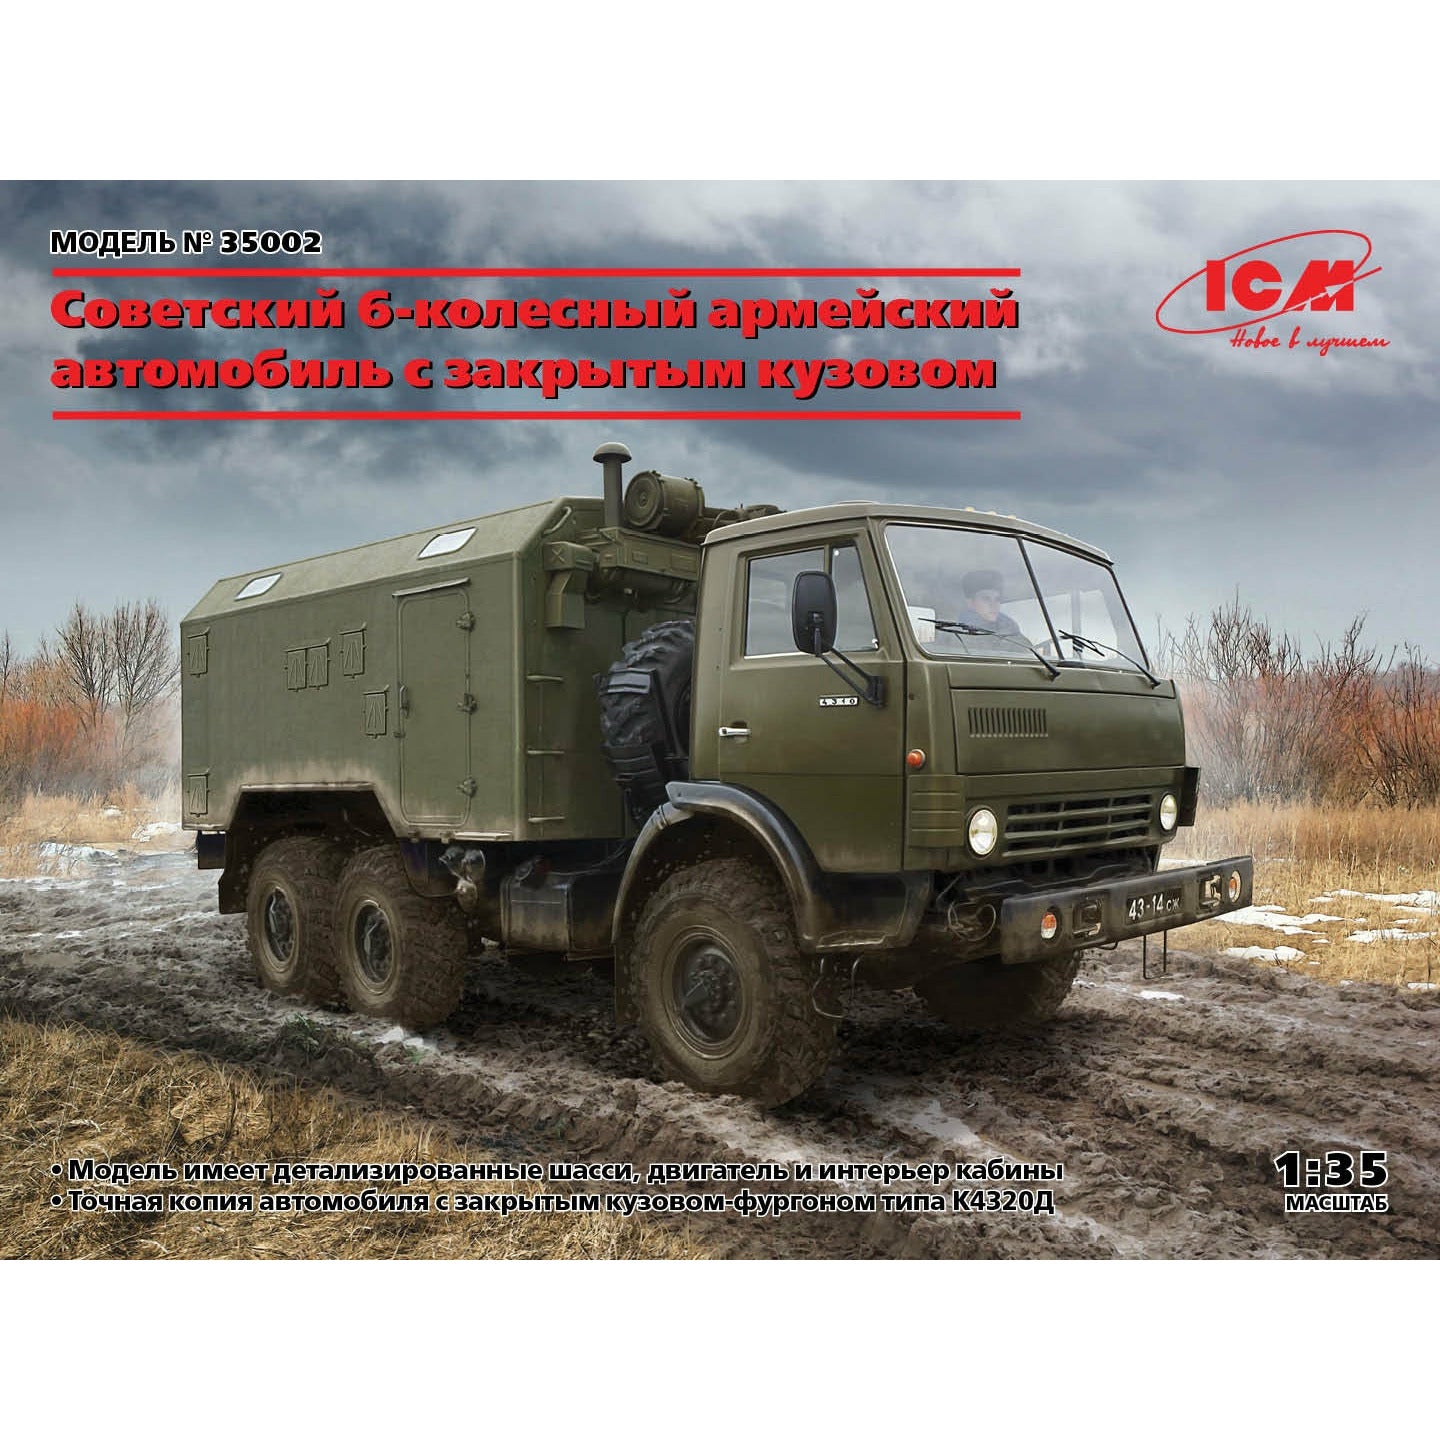 Soviet Six-Wheel Army Truck with Shelter 1/35 #35002 by ICM